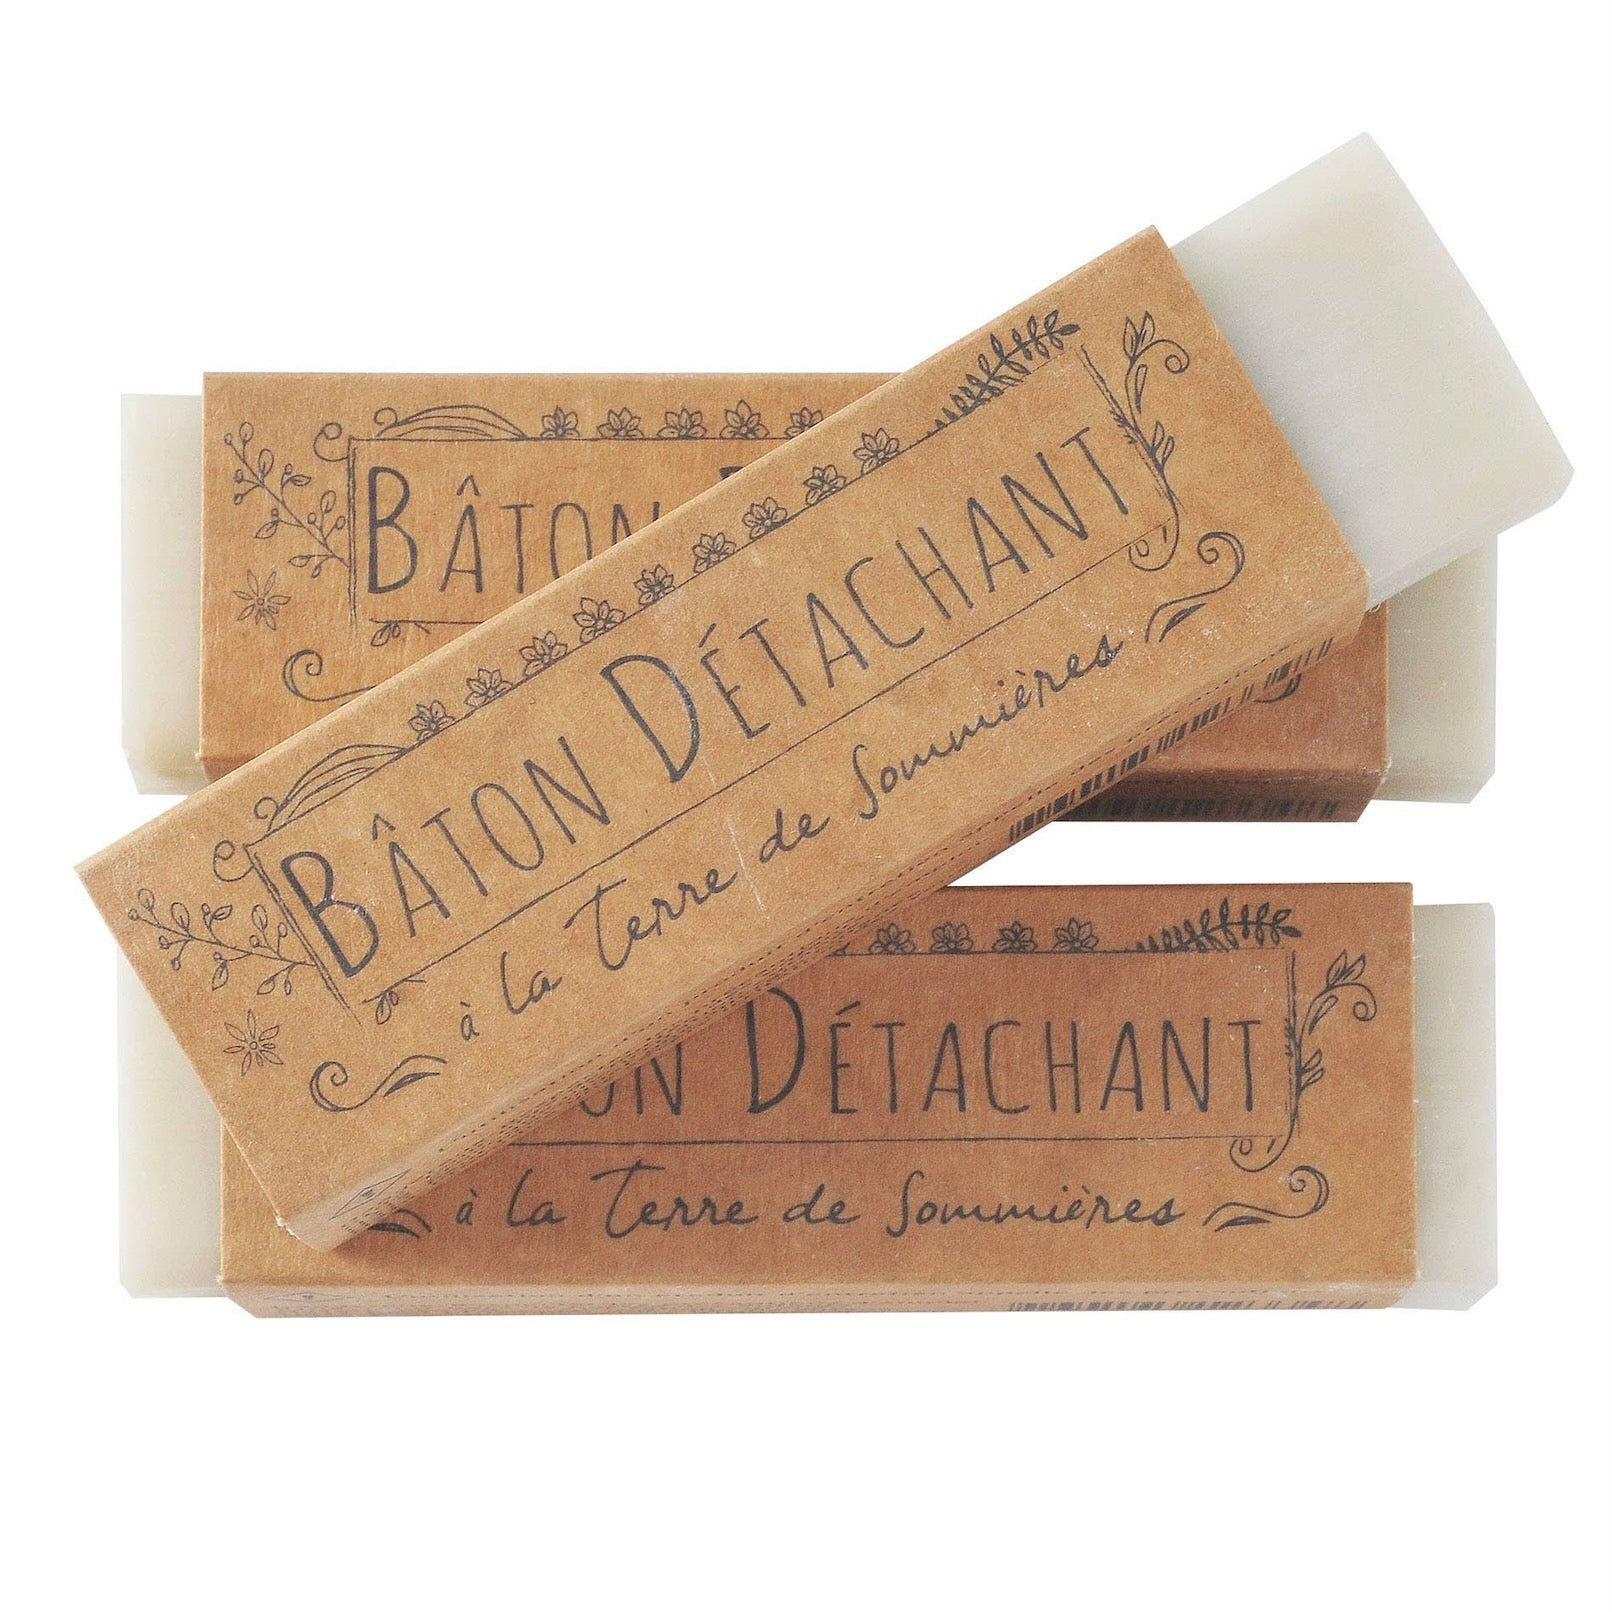 Maitre Savonitto - Laundry Stain Remover Stick